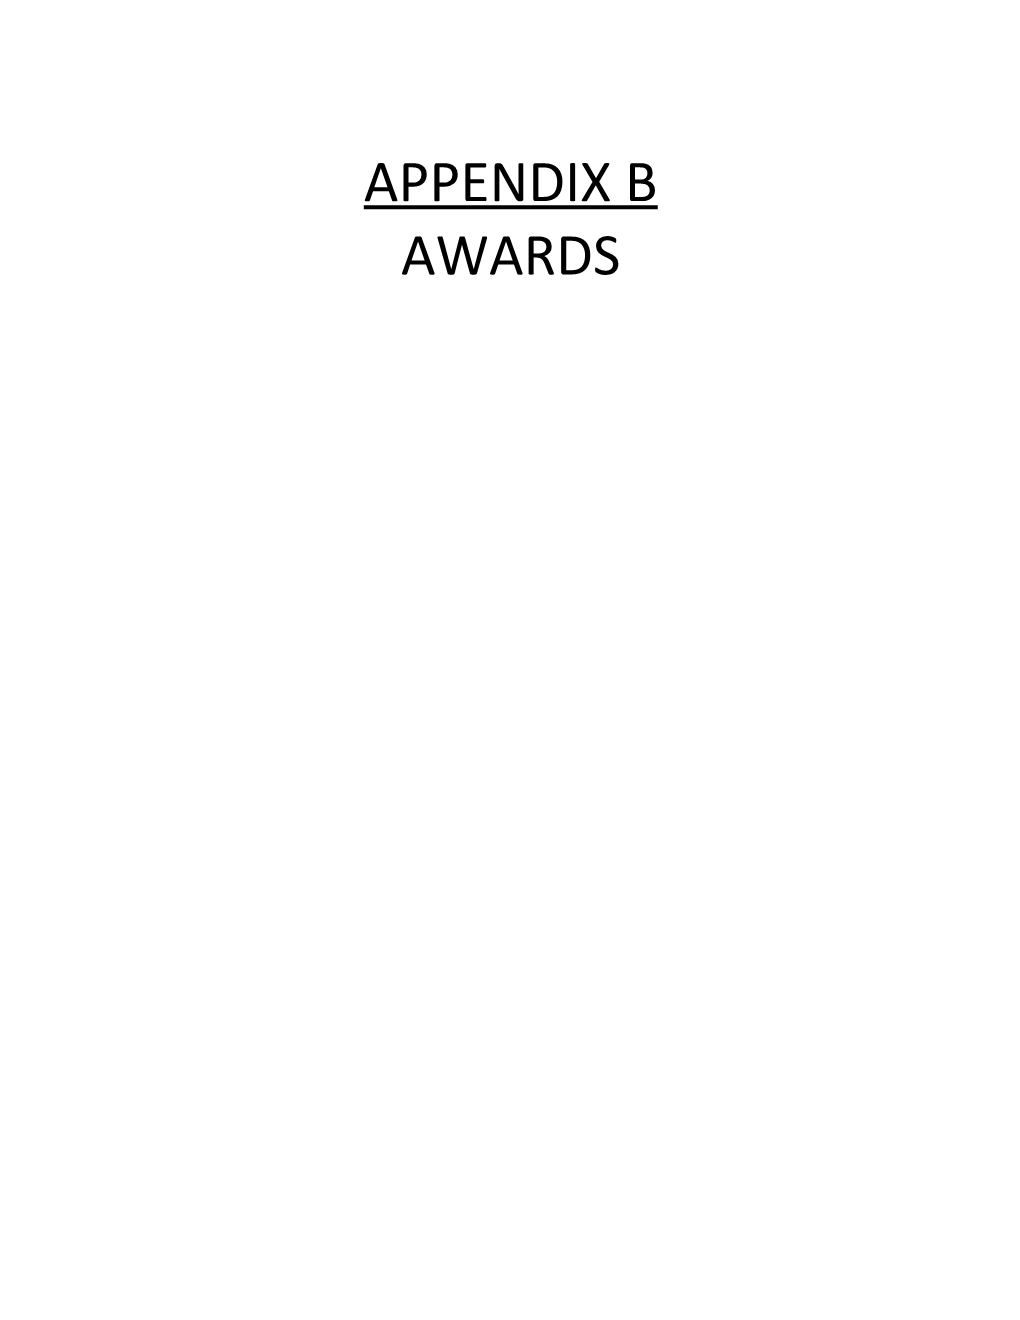 Listed Below Are the Athletic Awards Presently Recognized by the Athletic Department